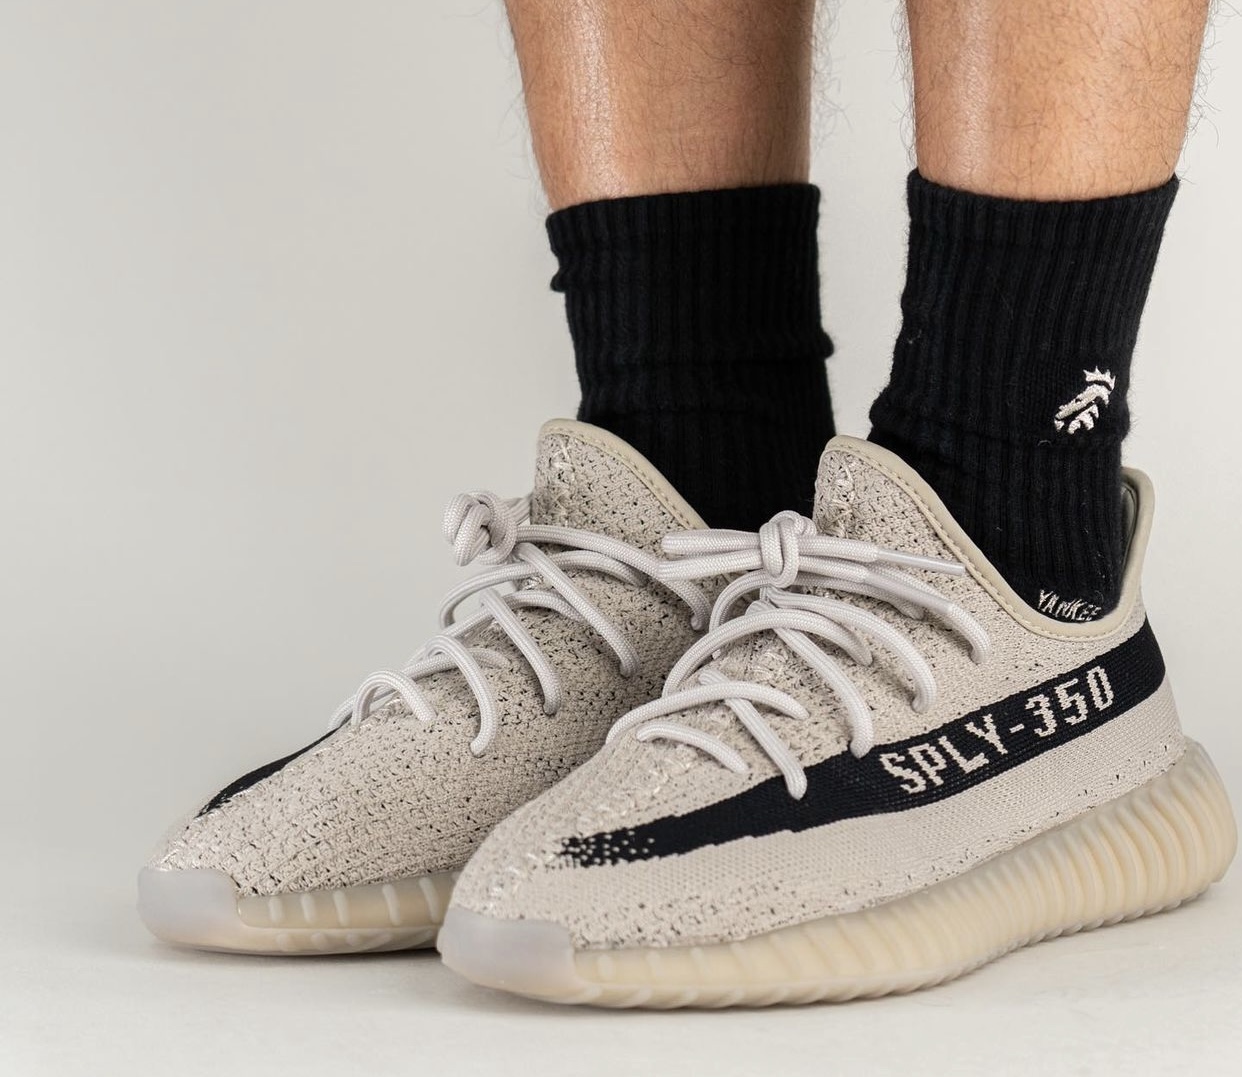 adidas Yeezy Boost 350 V2 HP7870 HP7870 Release Date + Where to Buy